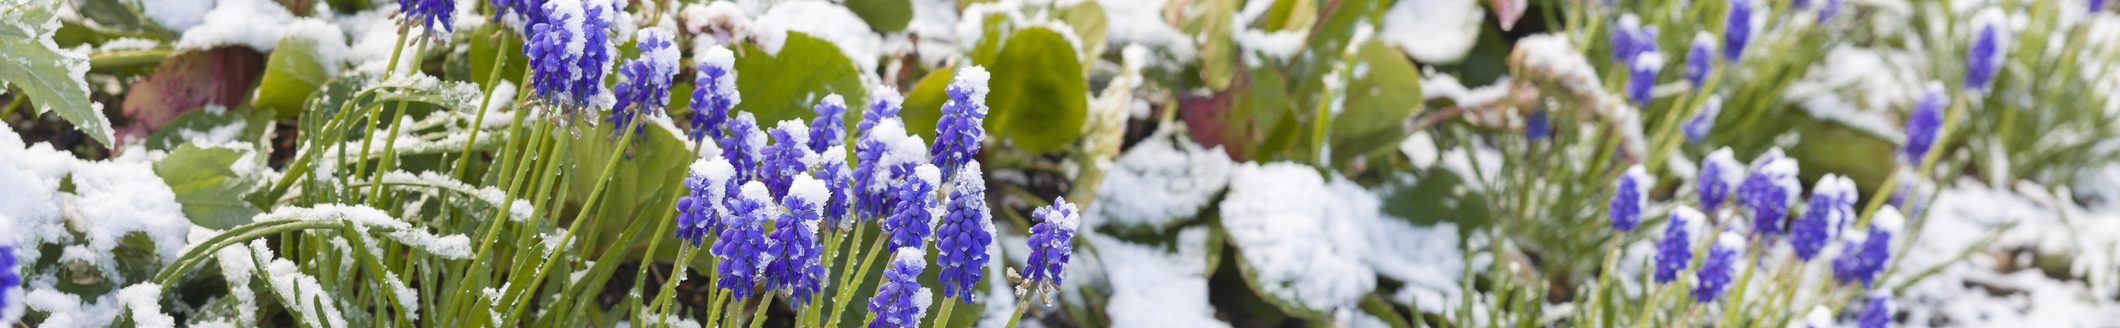 Muscari bulbs in a flower border covered in snow (Photo: iStock - PaulMaguire)